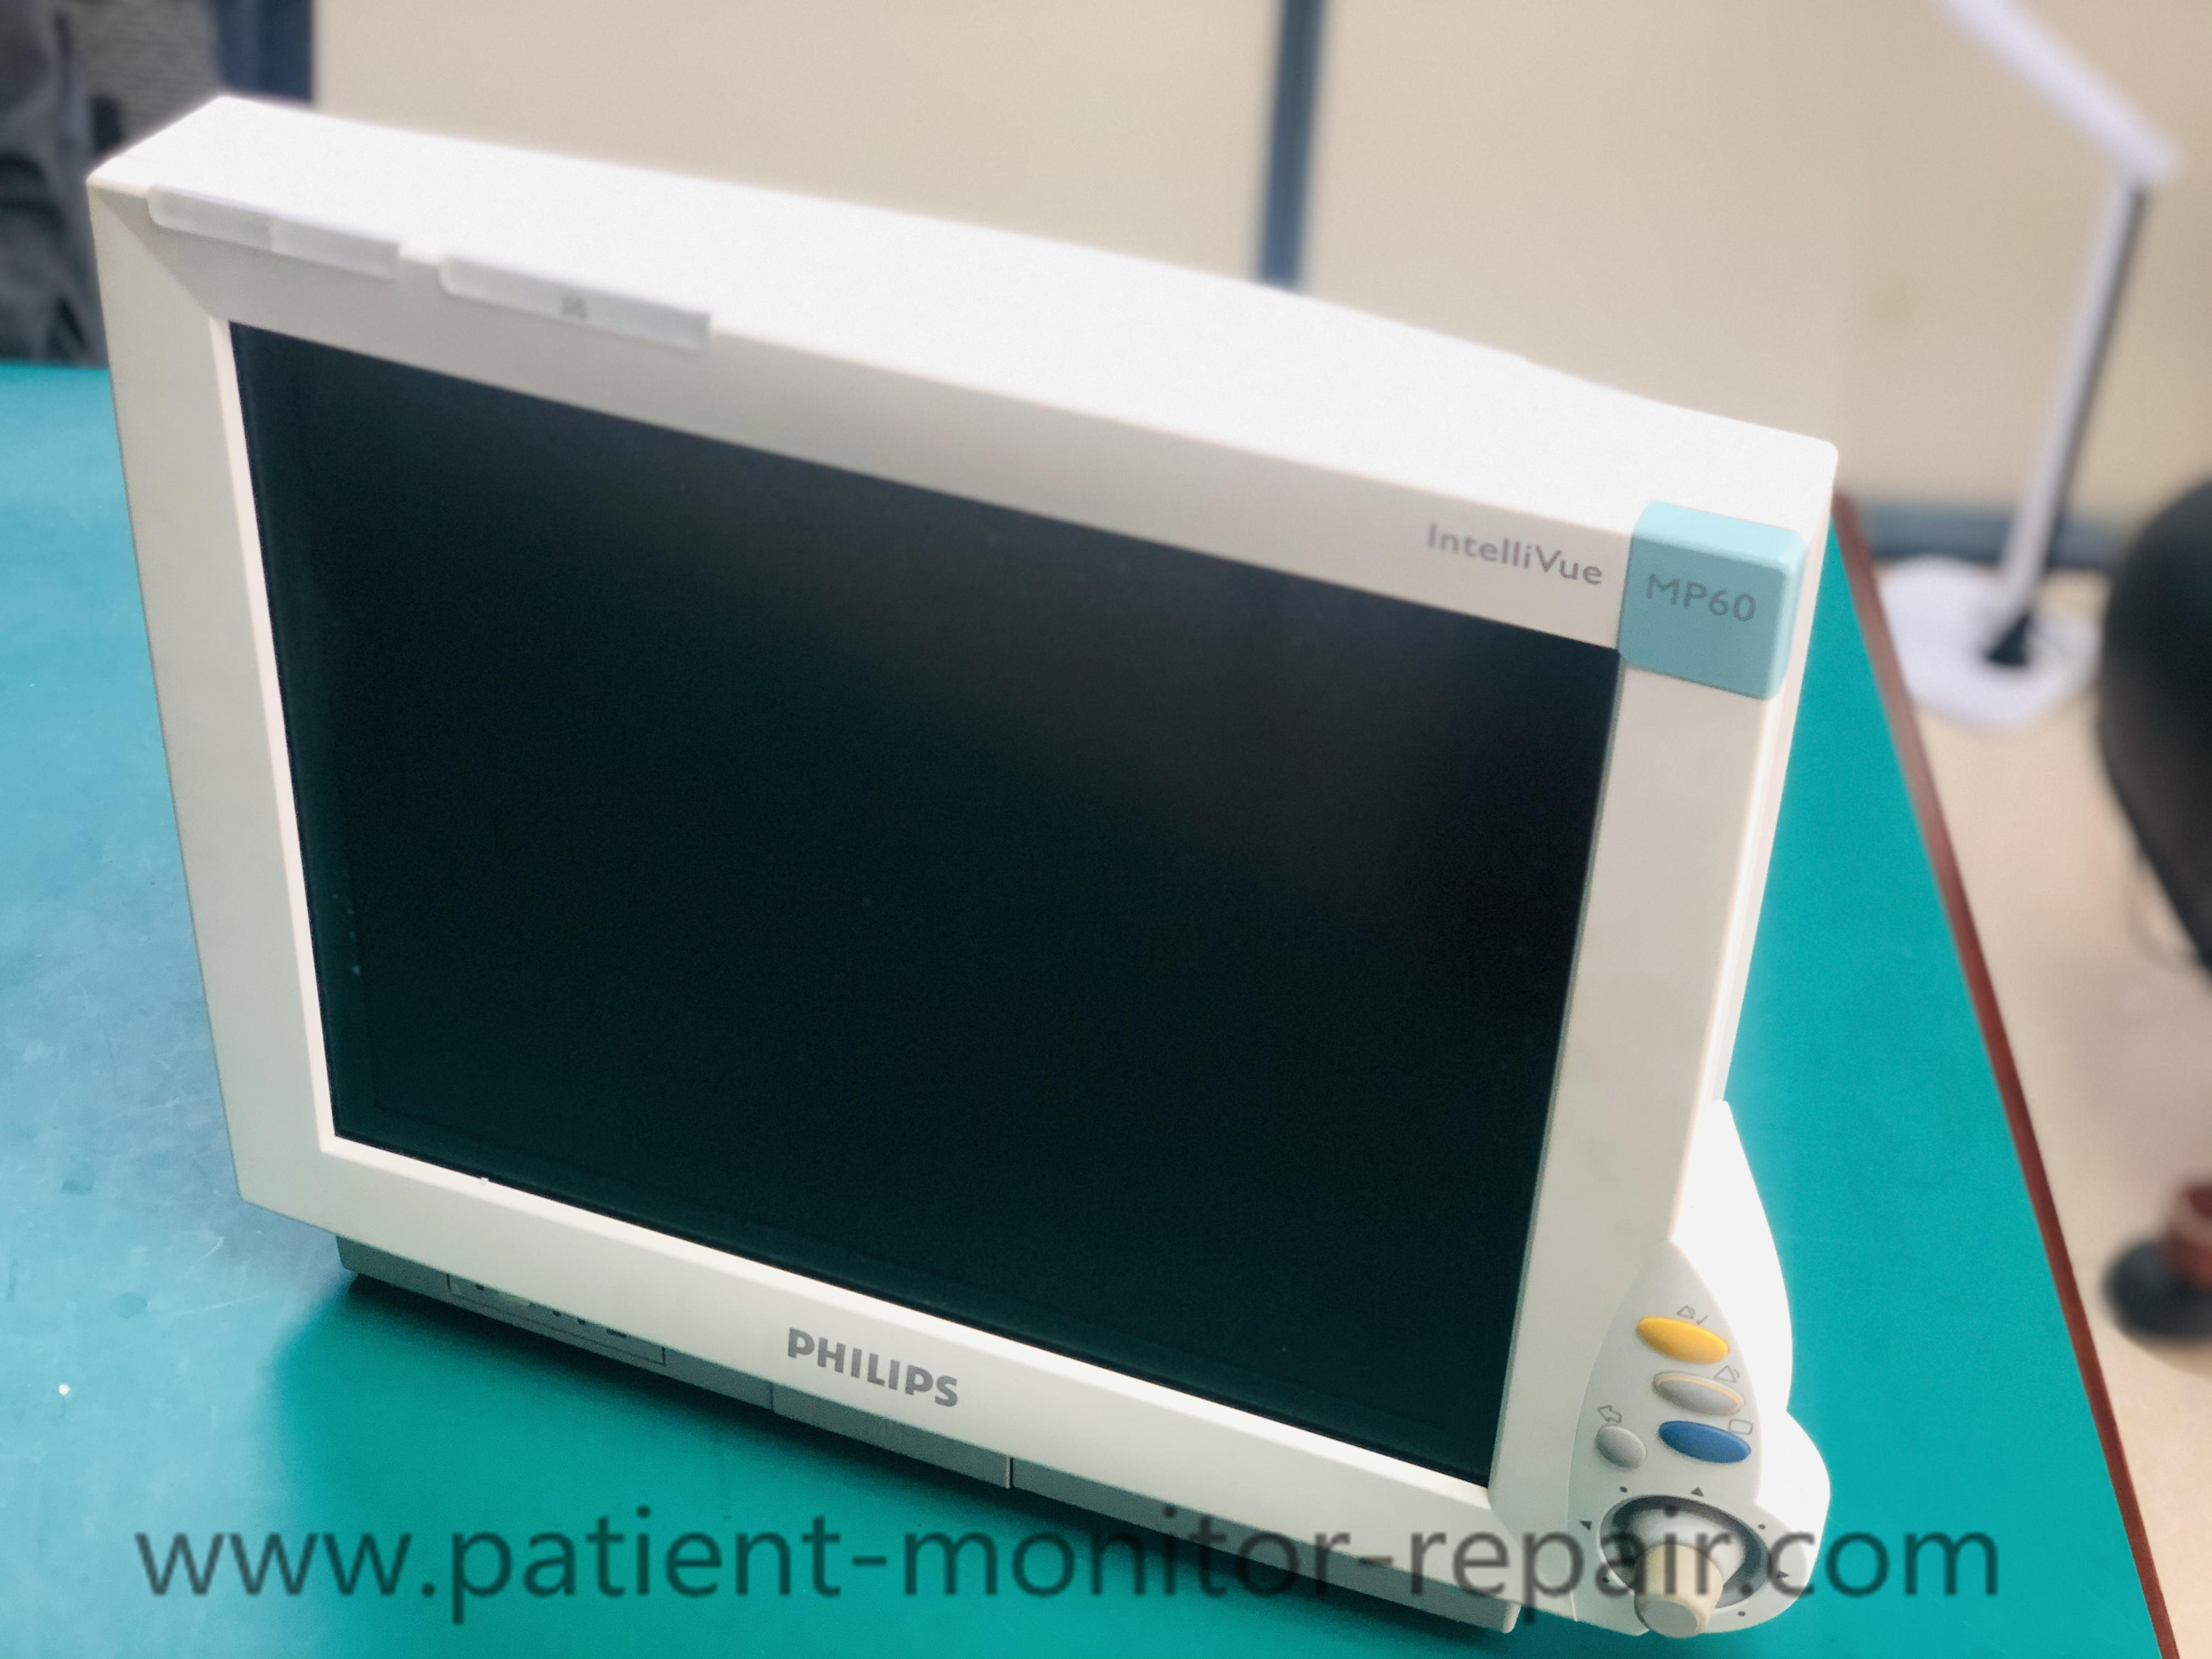 PHILIPS MP60 patient monitor Used Medical Equipment For Hospital